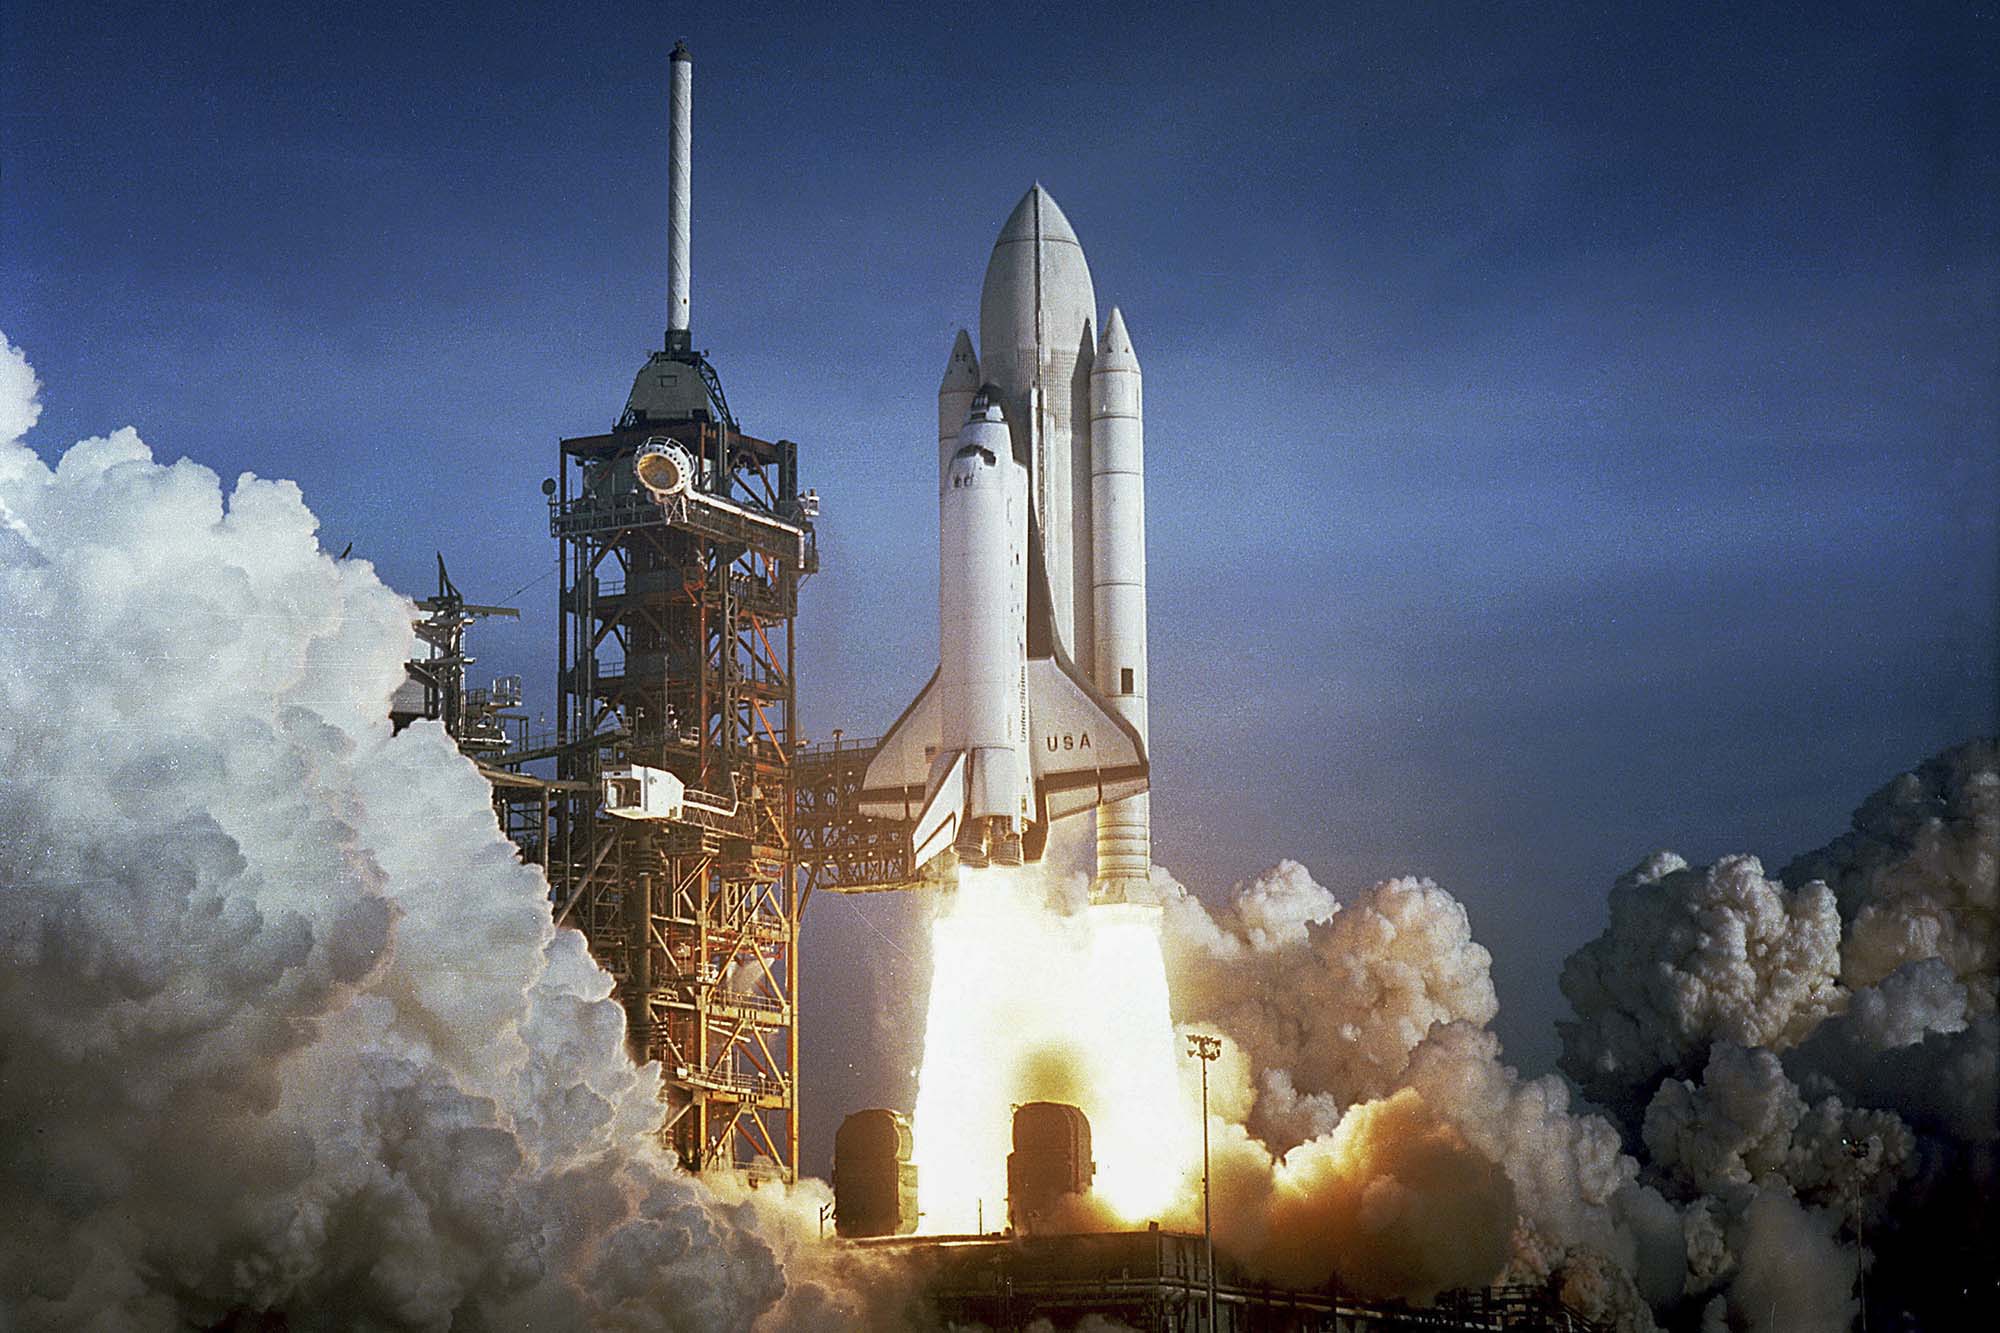 The Space Shuttle Columbia launching into the air with grey smoke surround it and bright white and yellow flames coming out the bottom